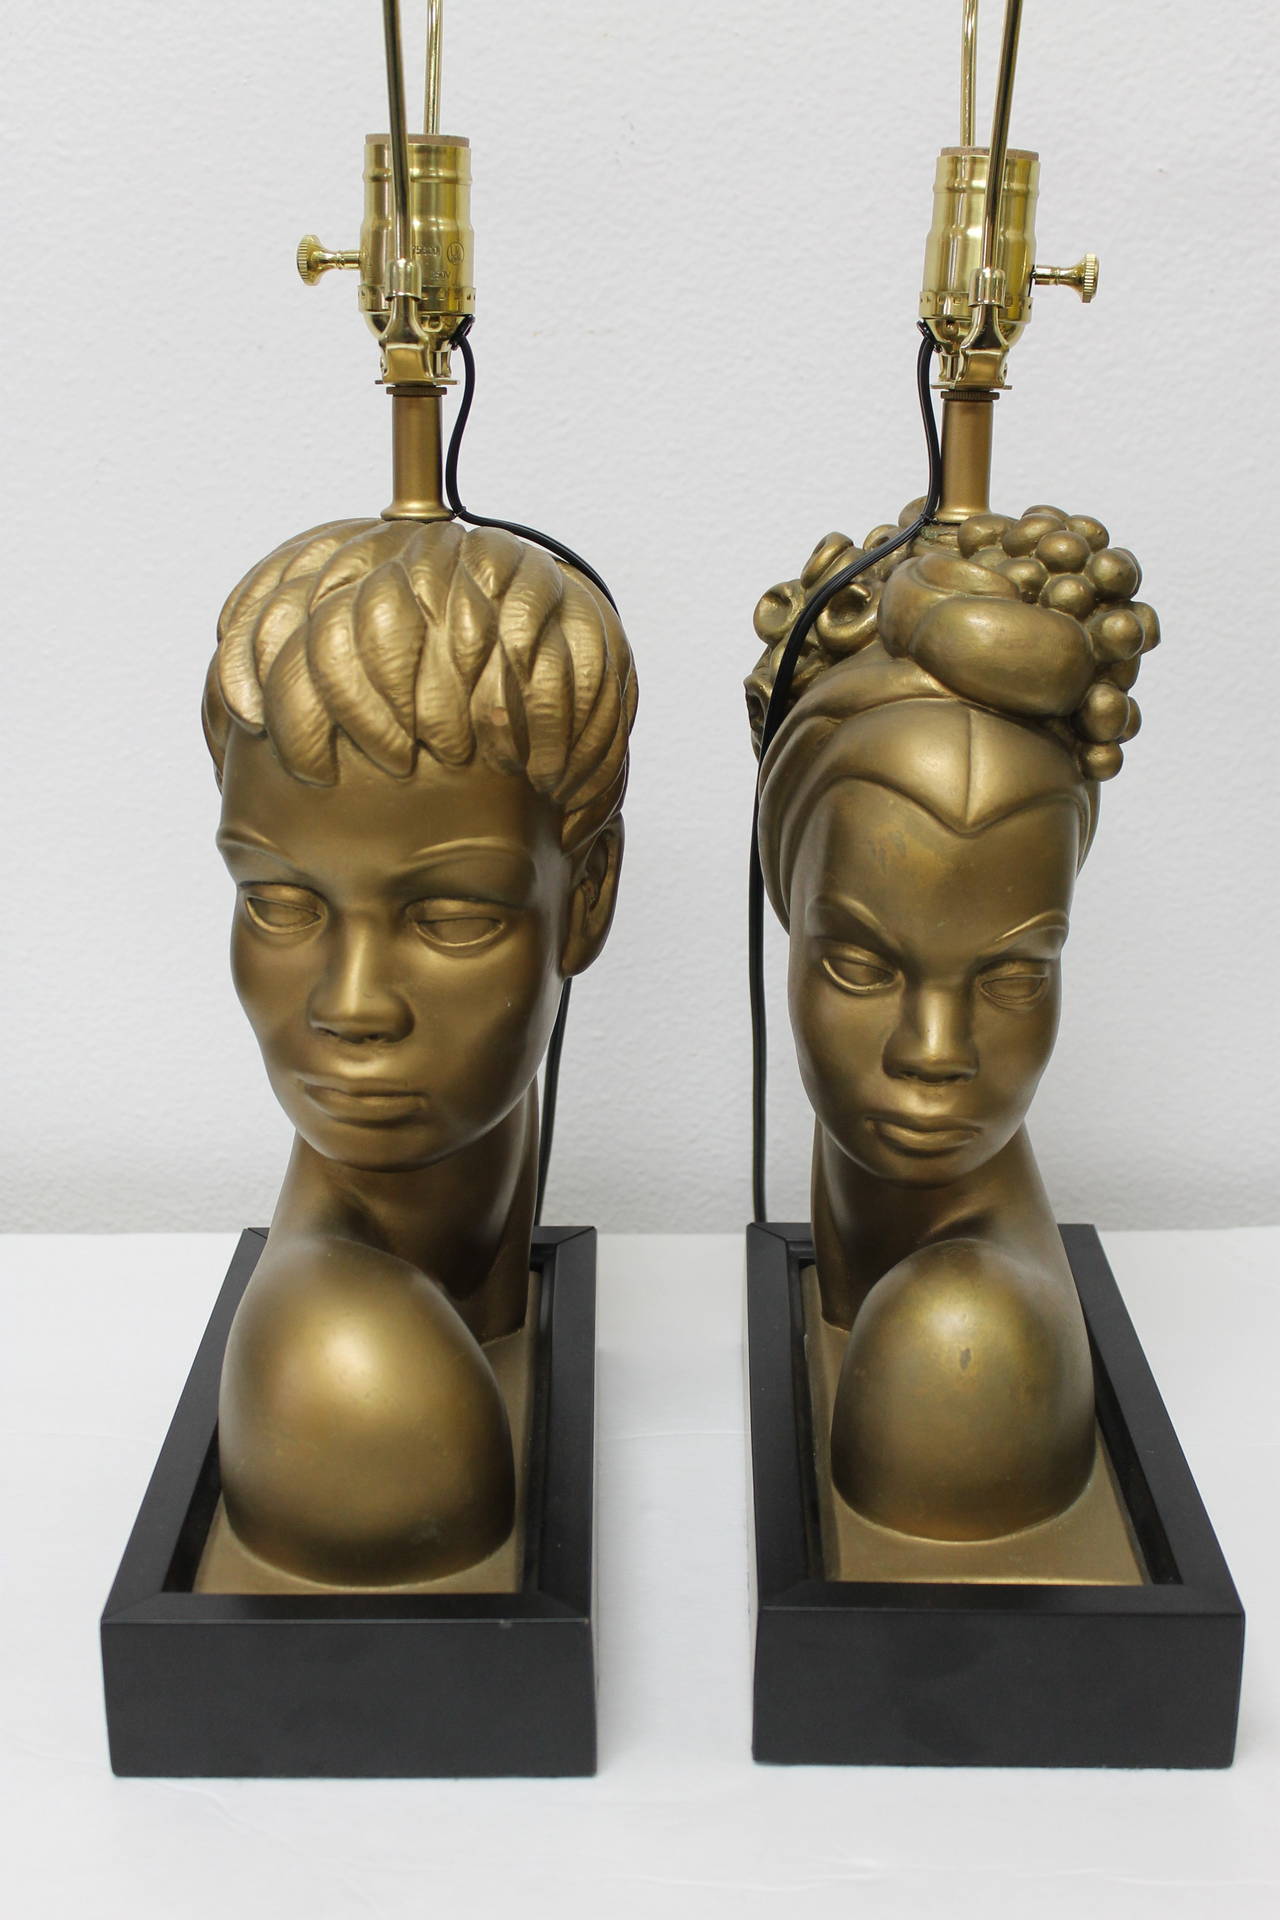 Wonderful pair of custom lamps depicting a Brazilian/Caribbean/Nubian couple. These lamps were produced recently using vintage busts. The base measures 10.25